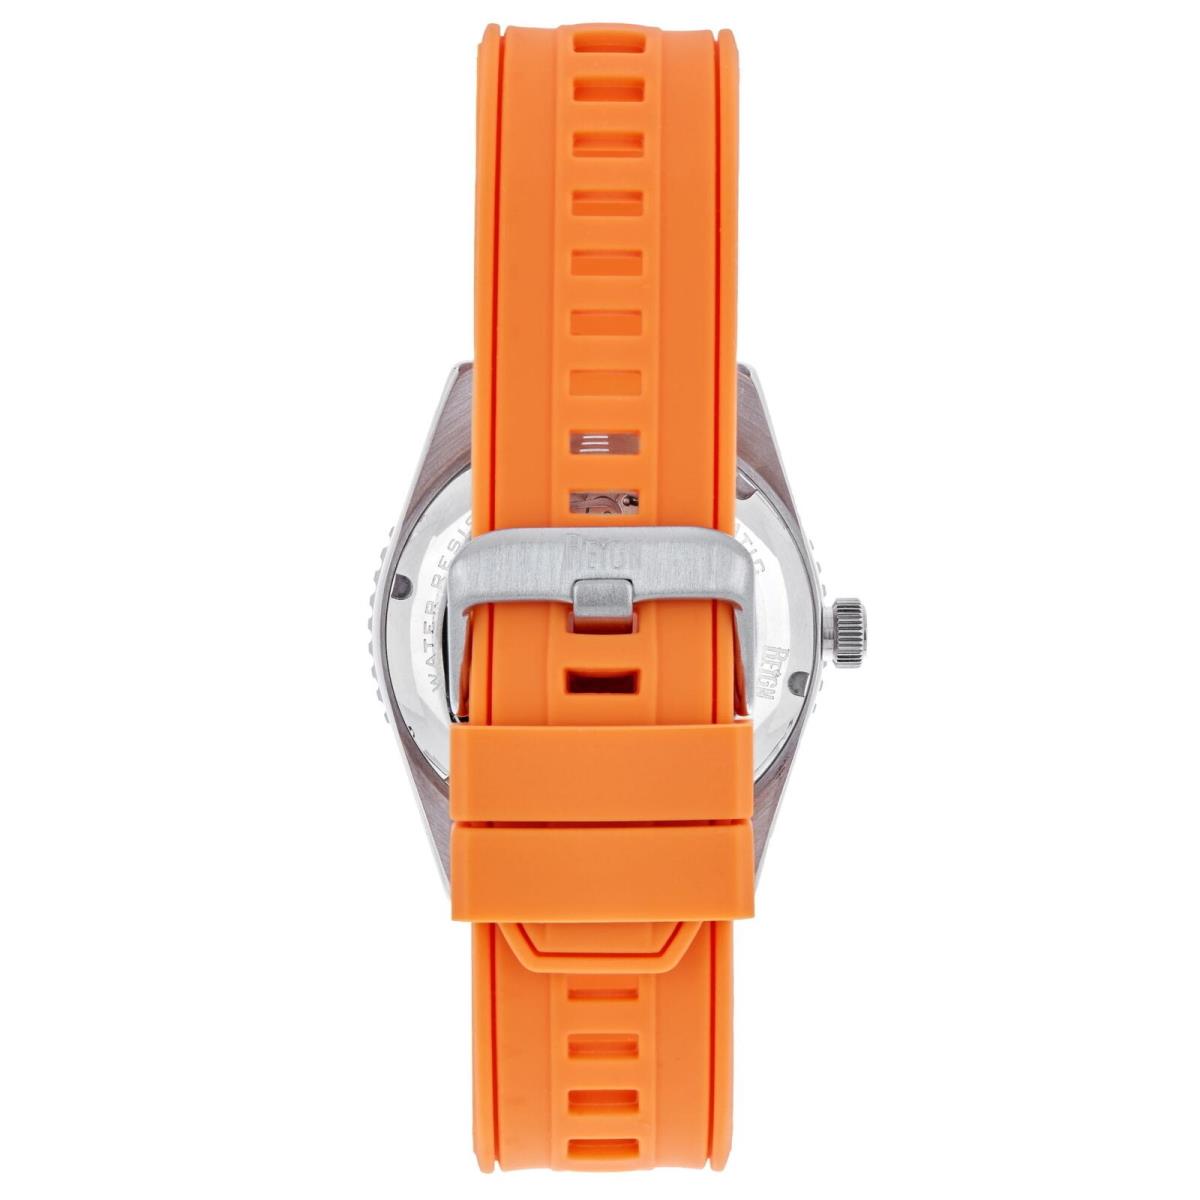 Reign Gage Automatic Watch W/date - Men`s Red/orange One Size REIRN6602